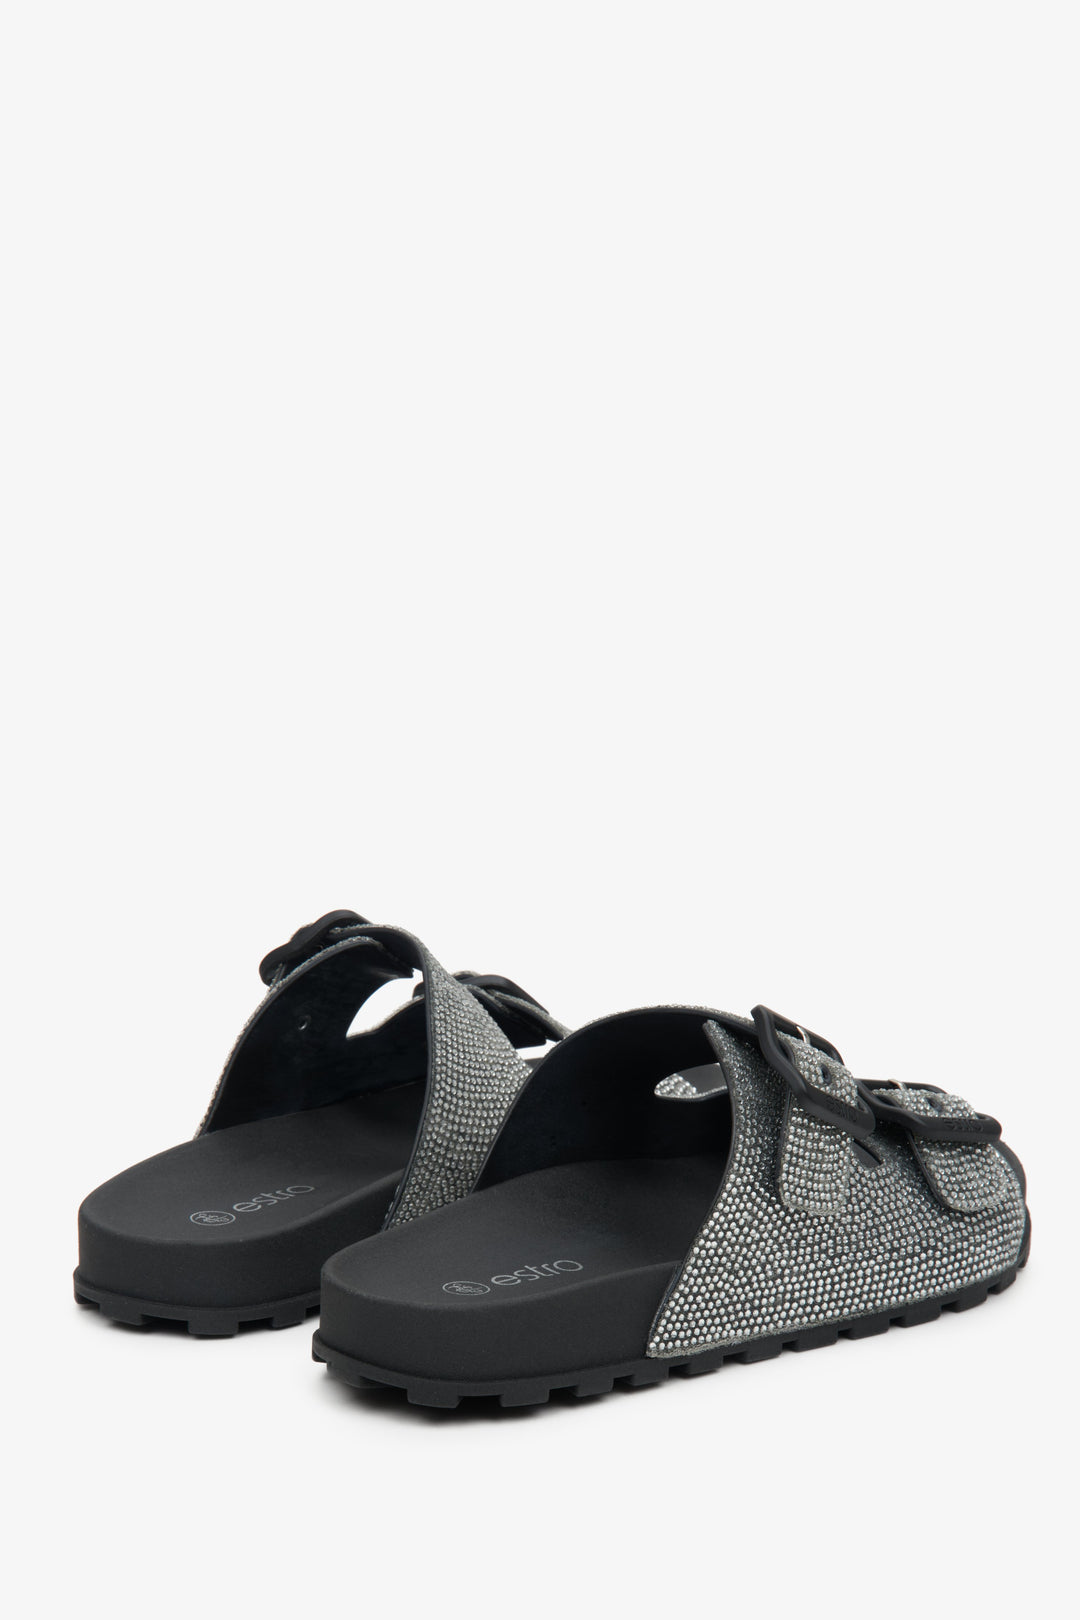 Estro women's black sandals with crystals - close-up of the rear sole.